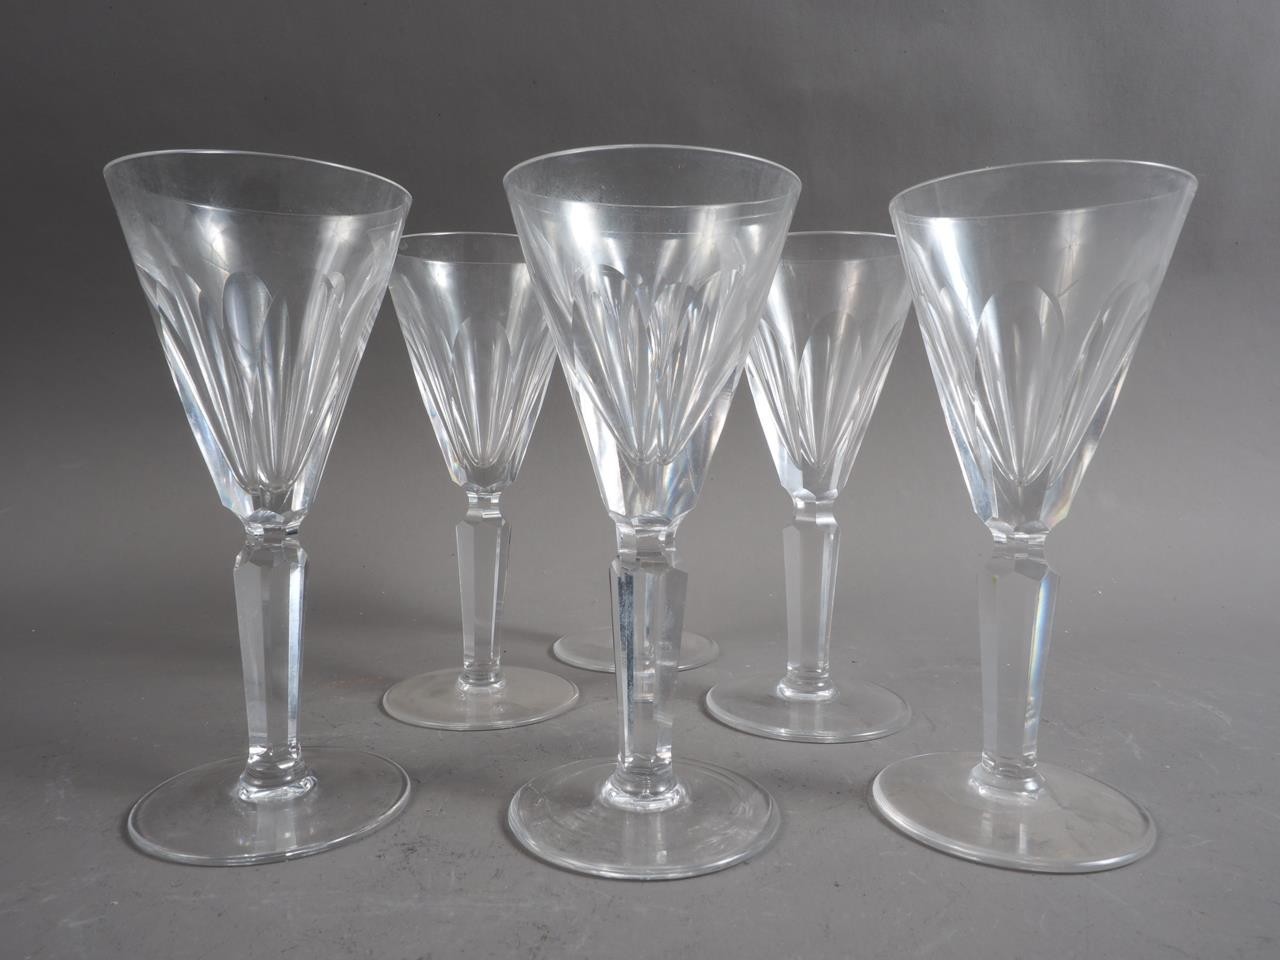 A set of six Waterford port glasses with faceted stems, 5 1/2" high